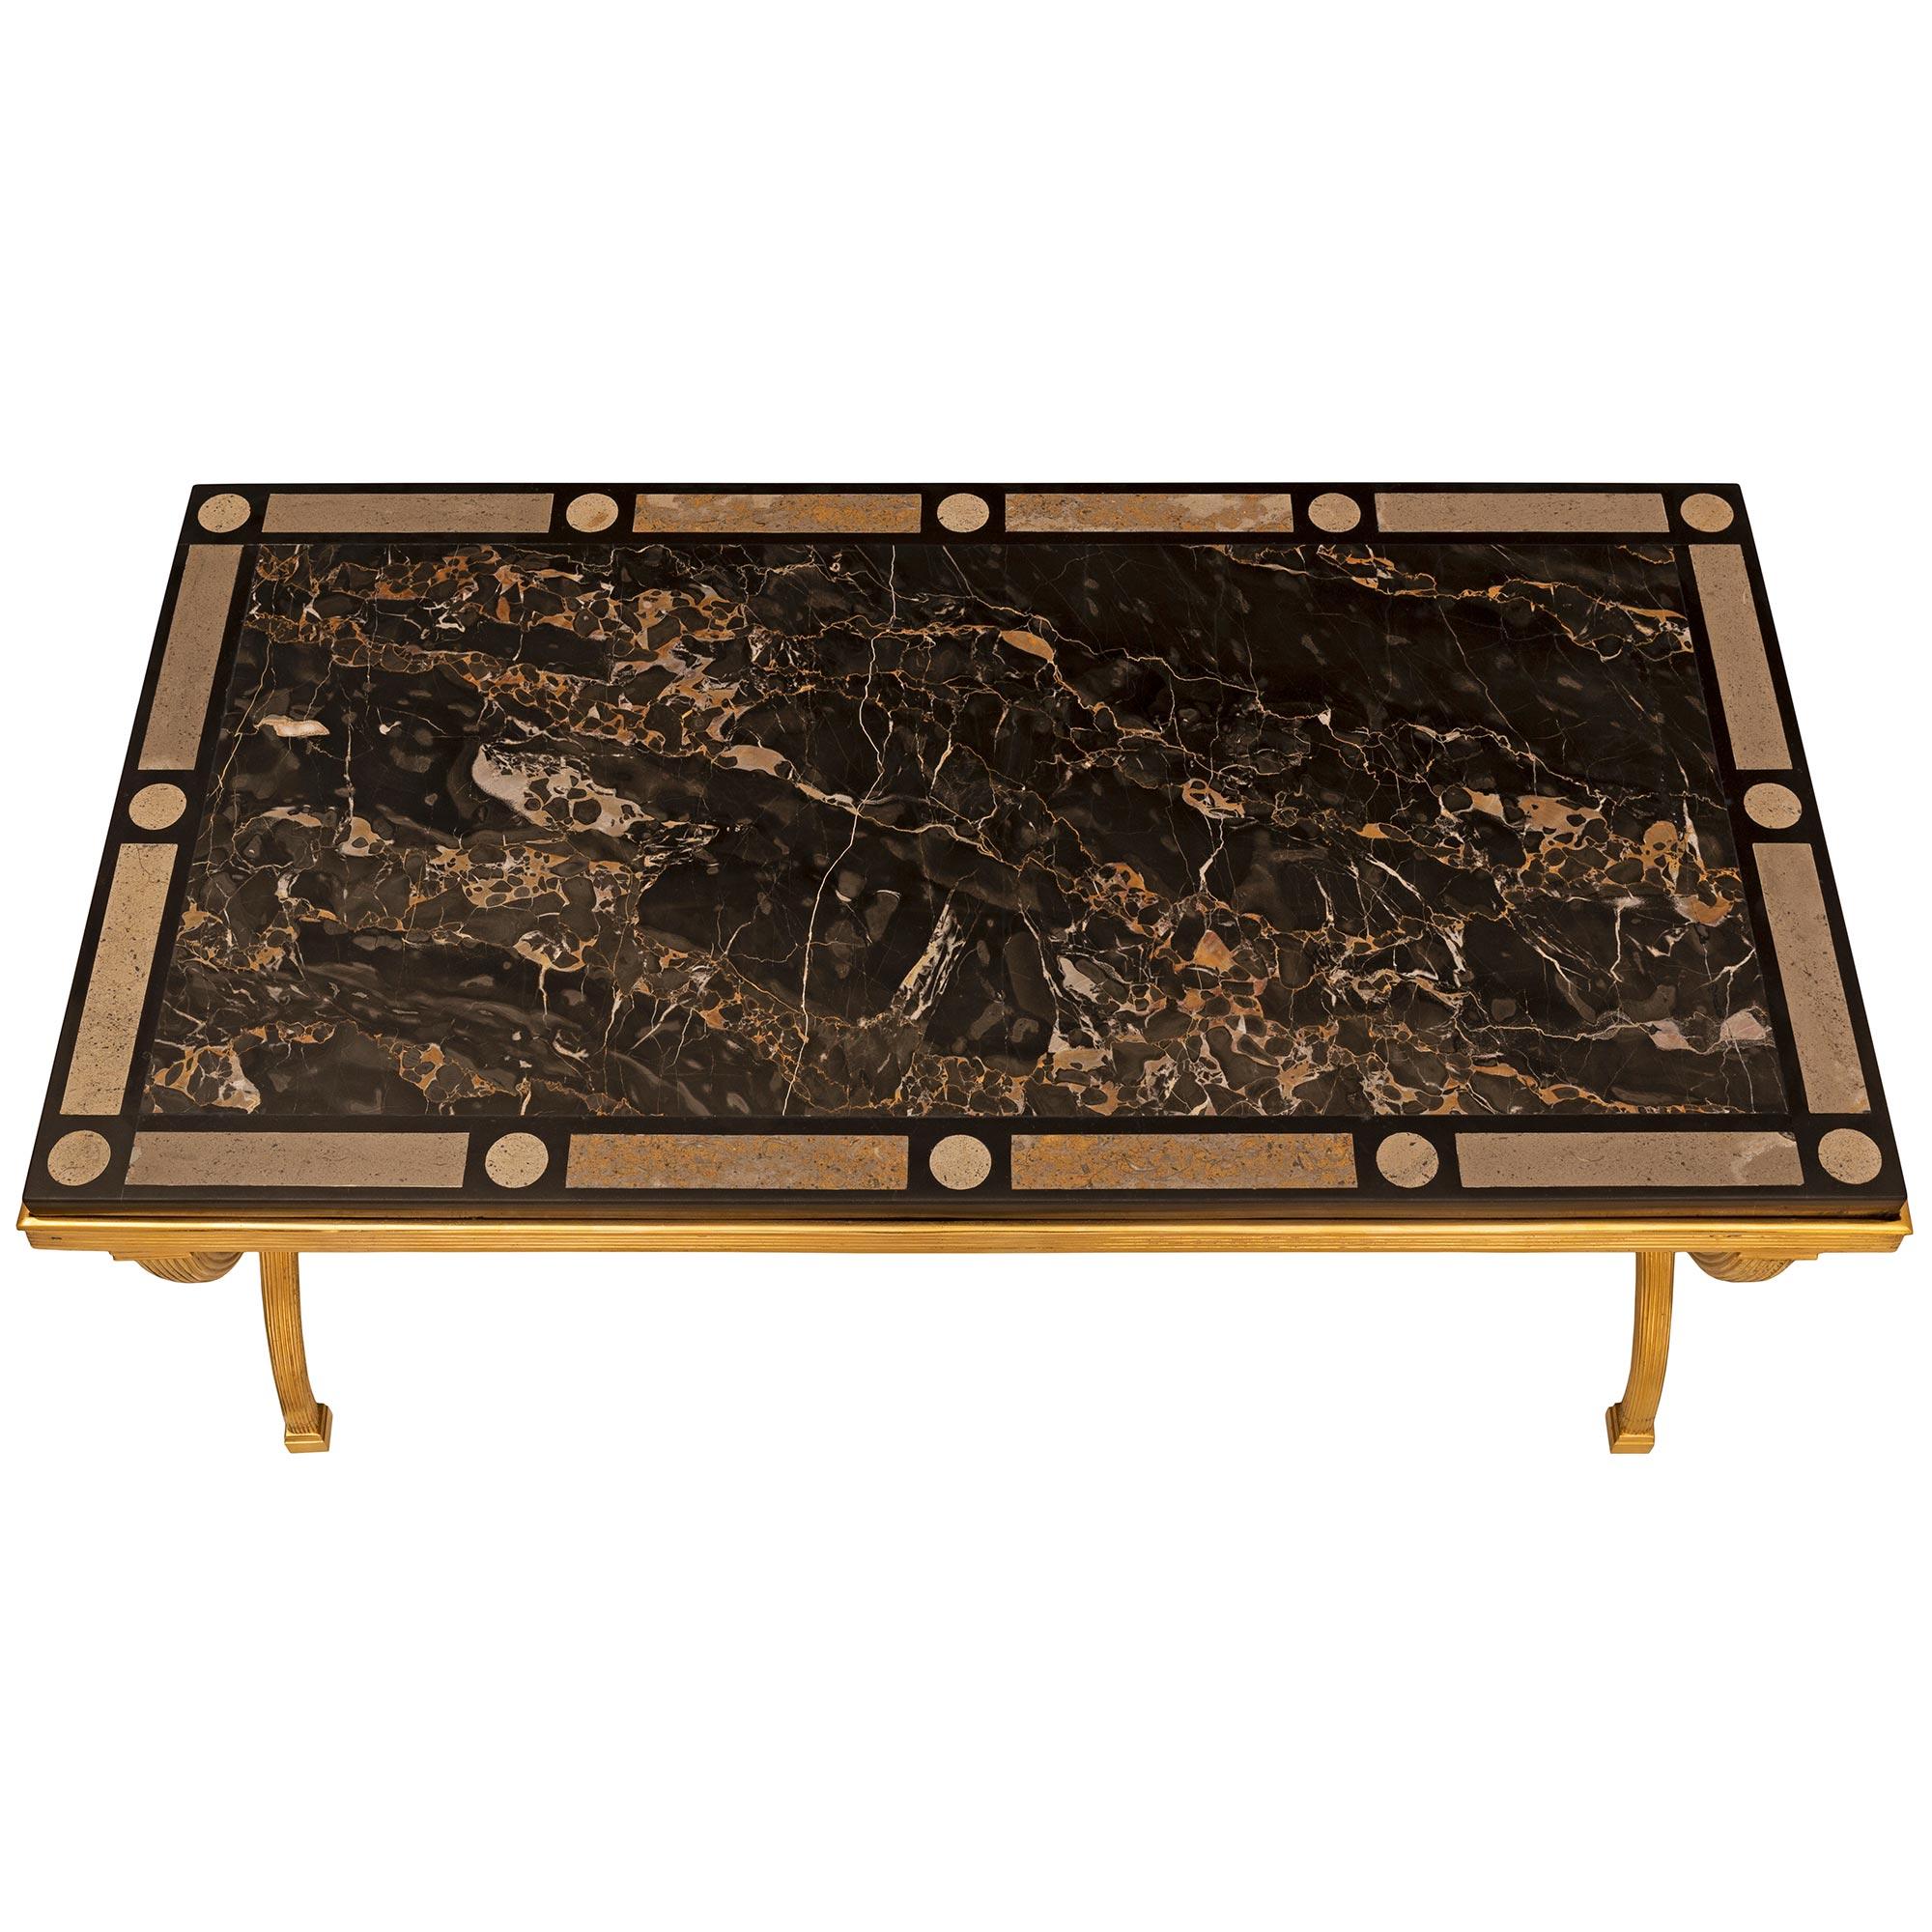 A stunning Italian 19th century Neo-Classical st. ormolu Portoro, black Belgian marble and soapstone specimen marble coffee table. The rectangular table is raised by beautiful elegantly curved fluted legs with block feet and connected by a turned